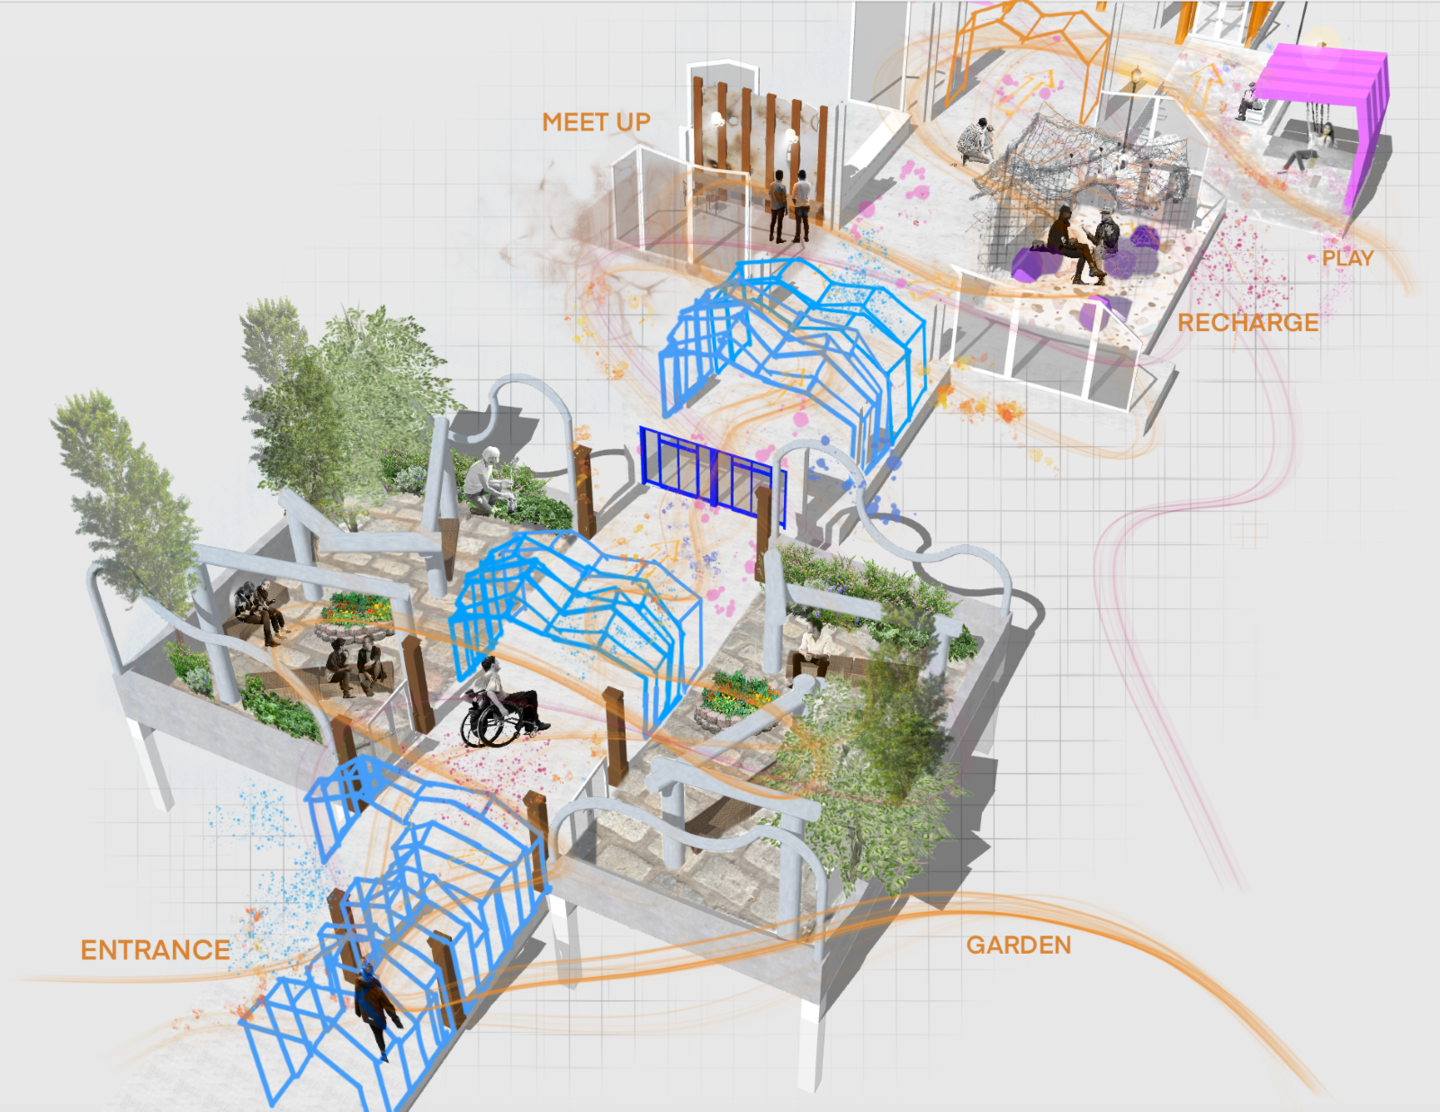 Axonometric view showing the interior of the Outdoor Garden, Meet up space, Recharge area and Play space